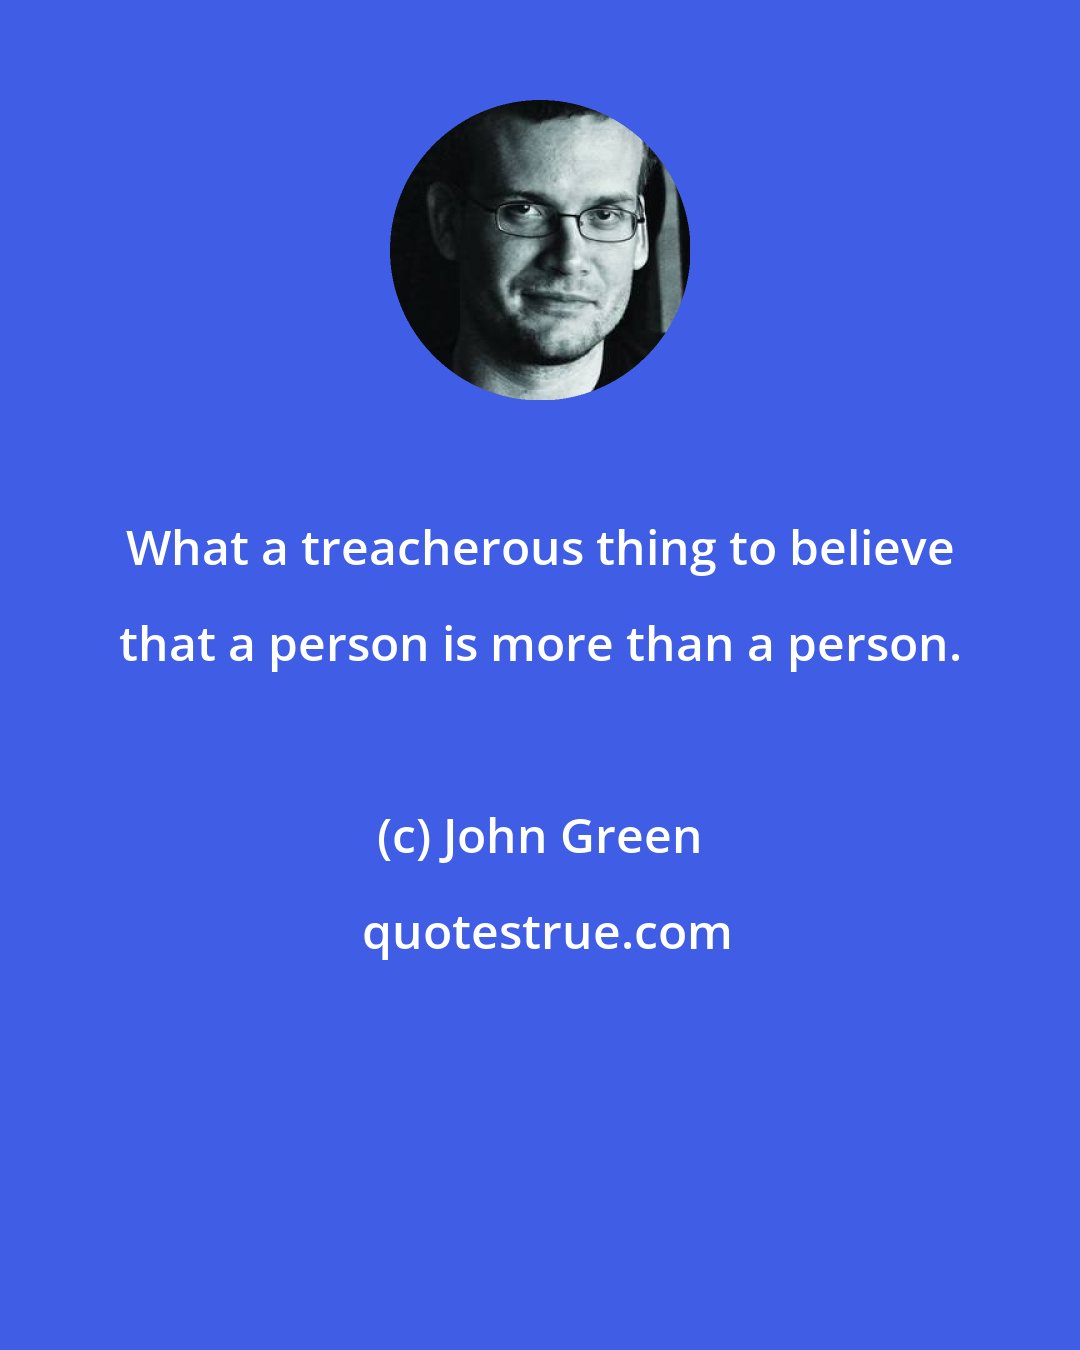 John Green: What a treacherous thing to believe that a person is more than a person.